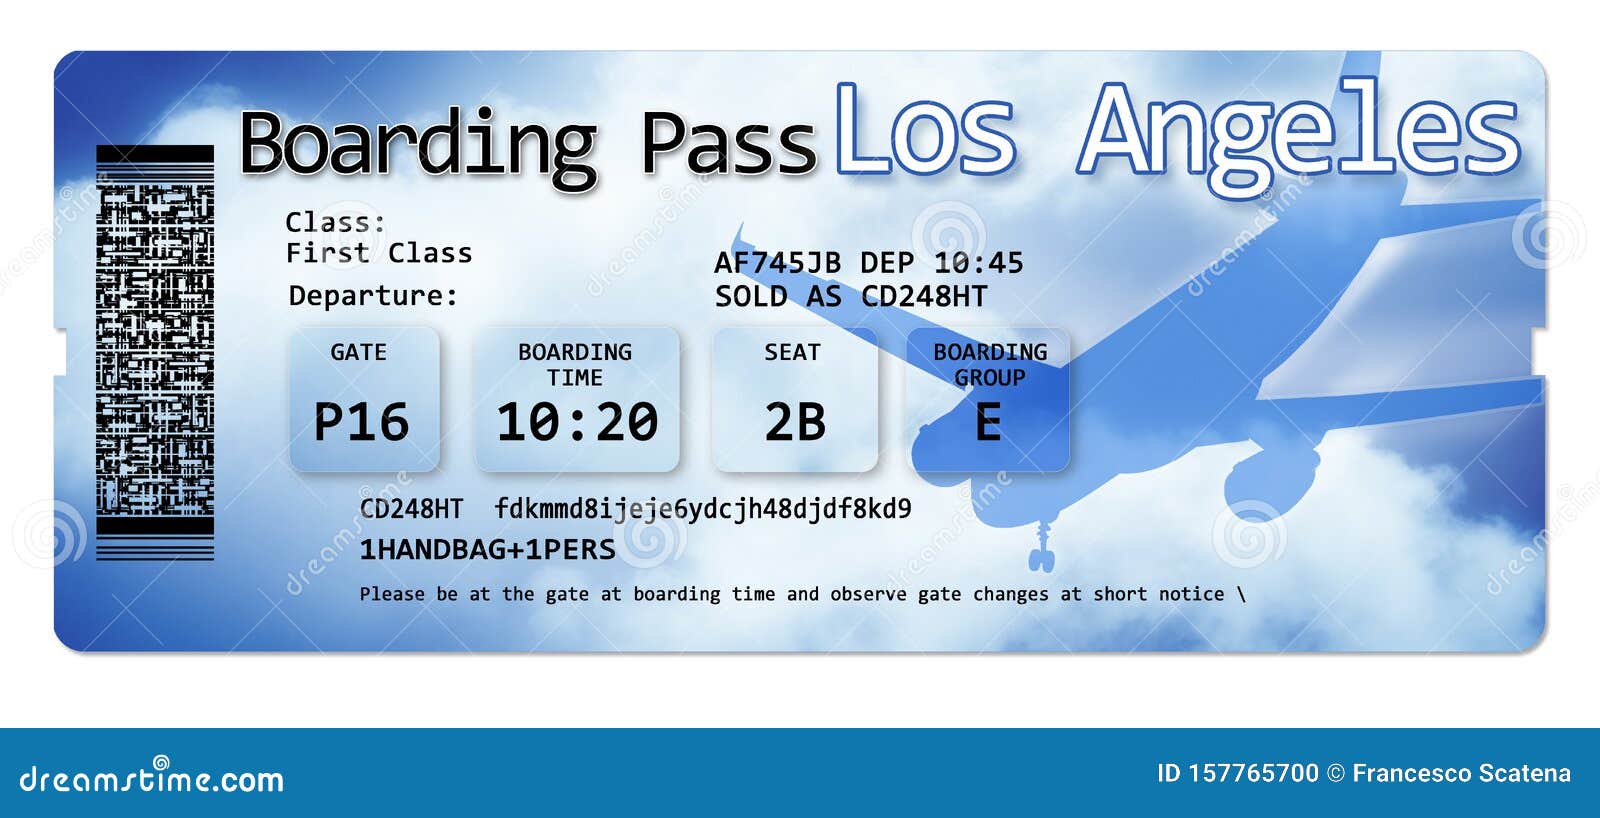 airline boarding pass tickets to los angeles - the contents of the image are totally invented and does not contain under copyright